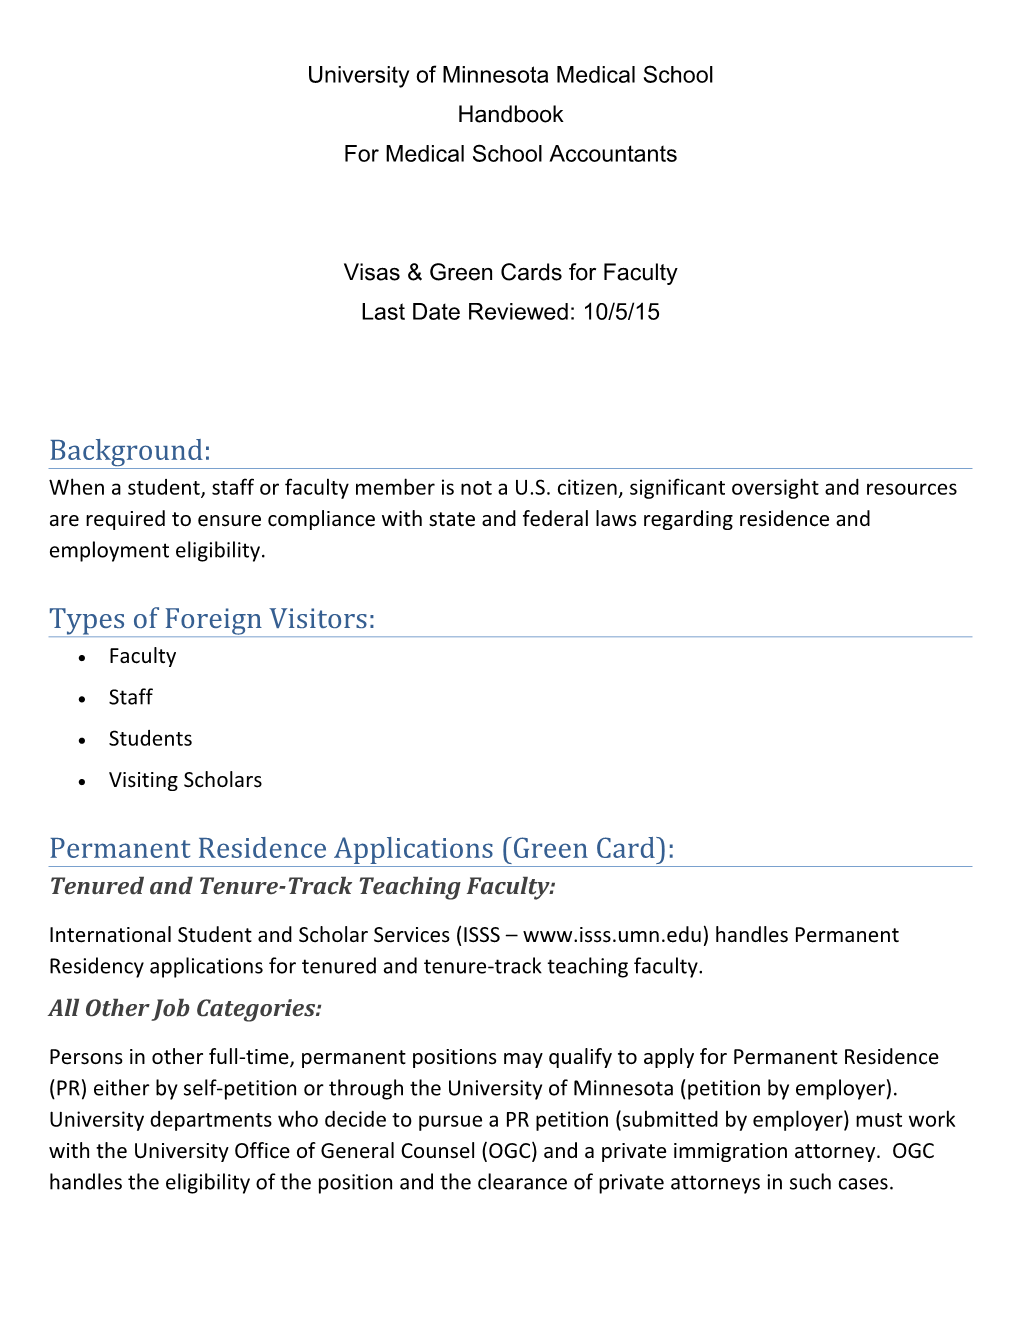 Permanent Residence Applications (Green Card)